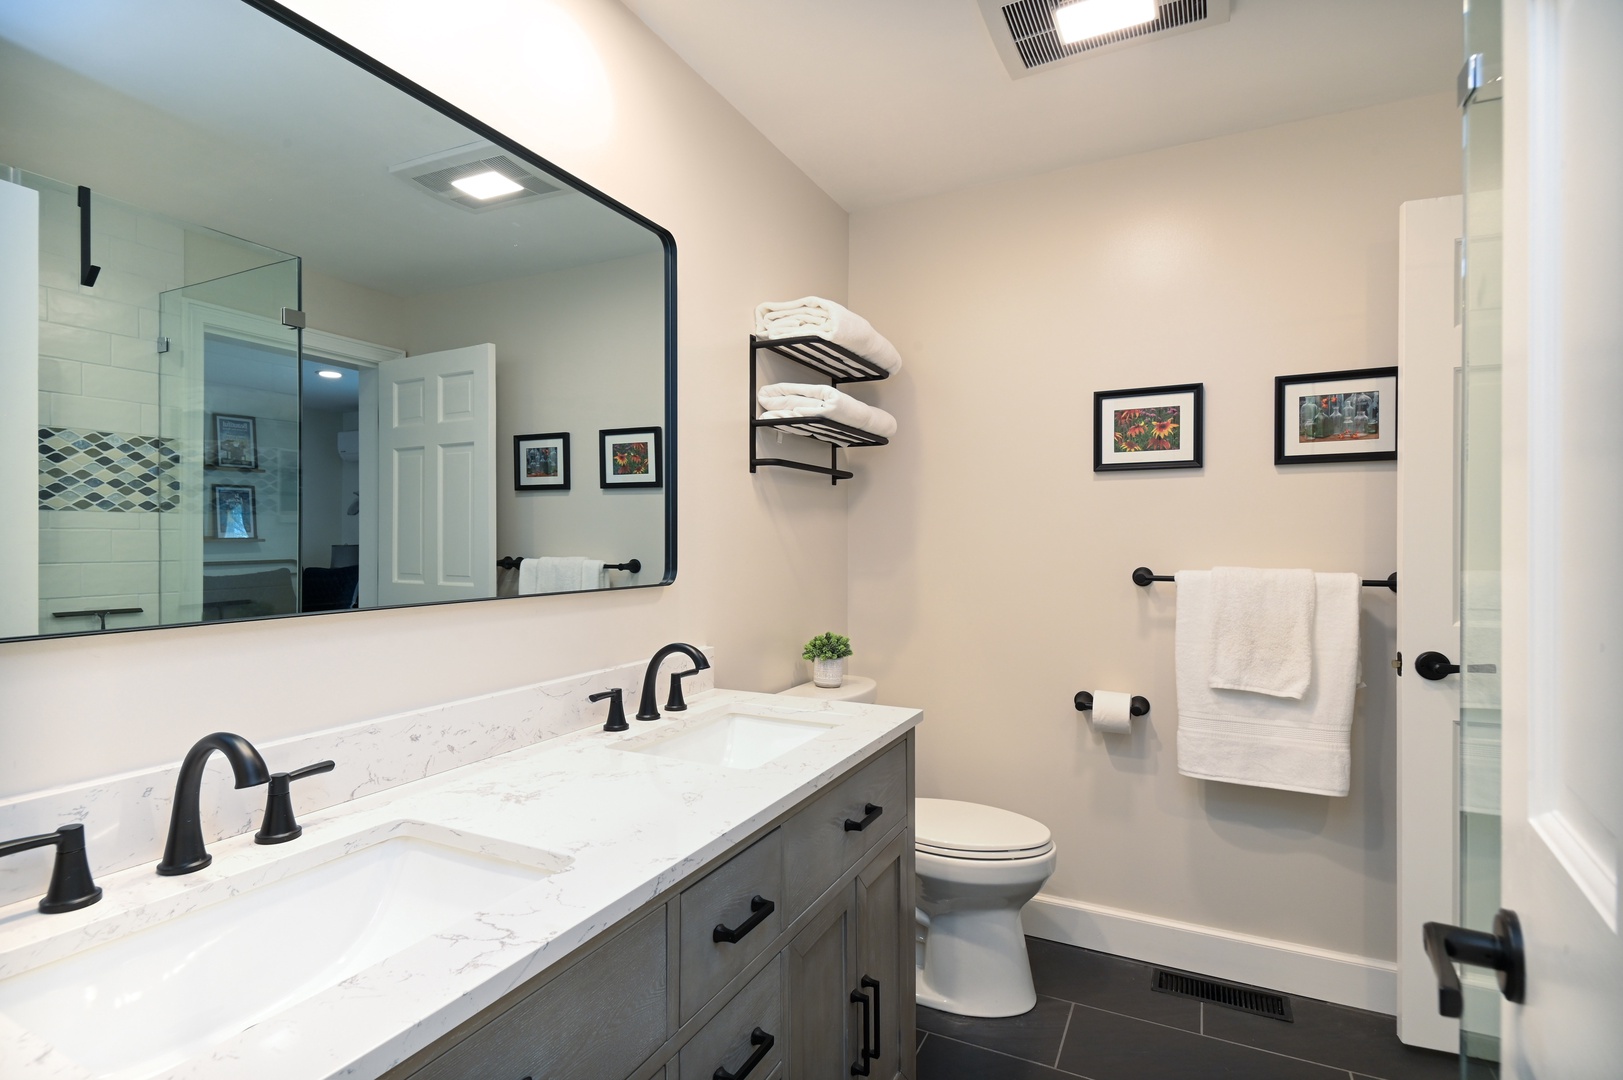 The stylish full bath showcases a double vanity & glass shower